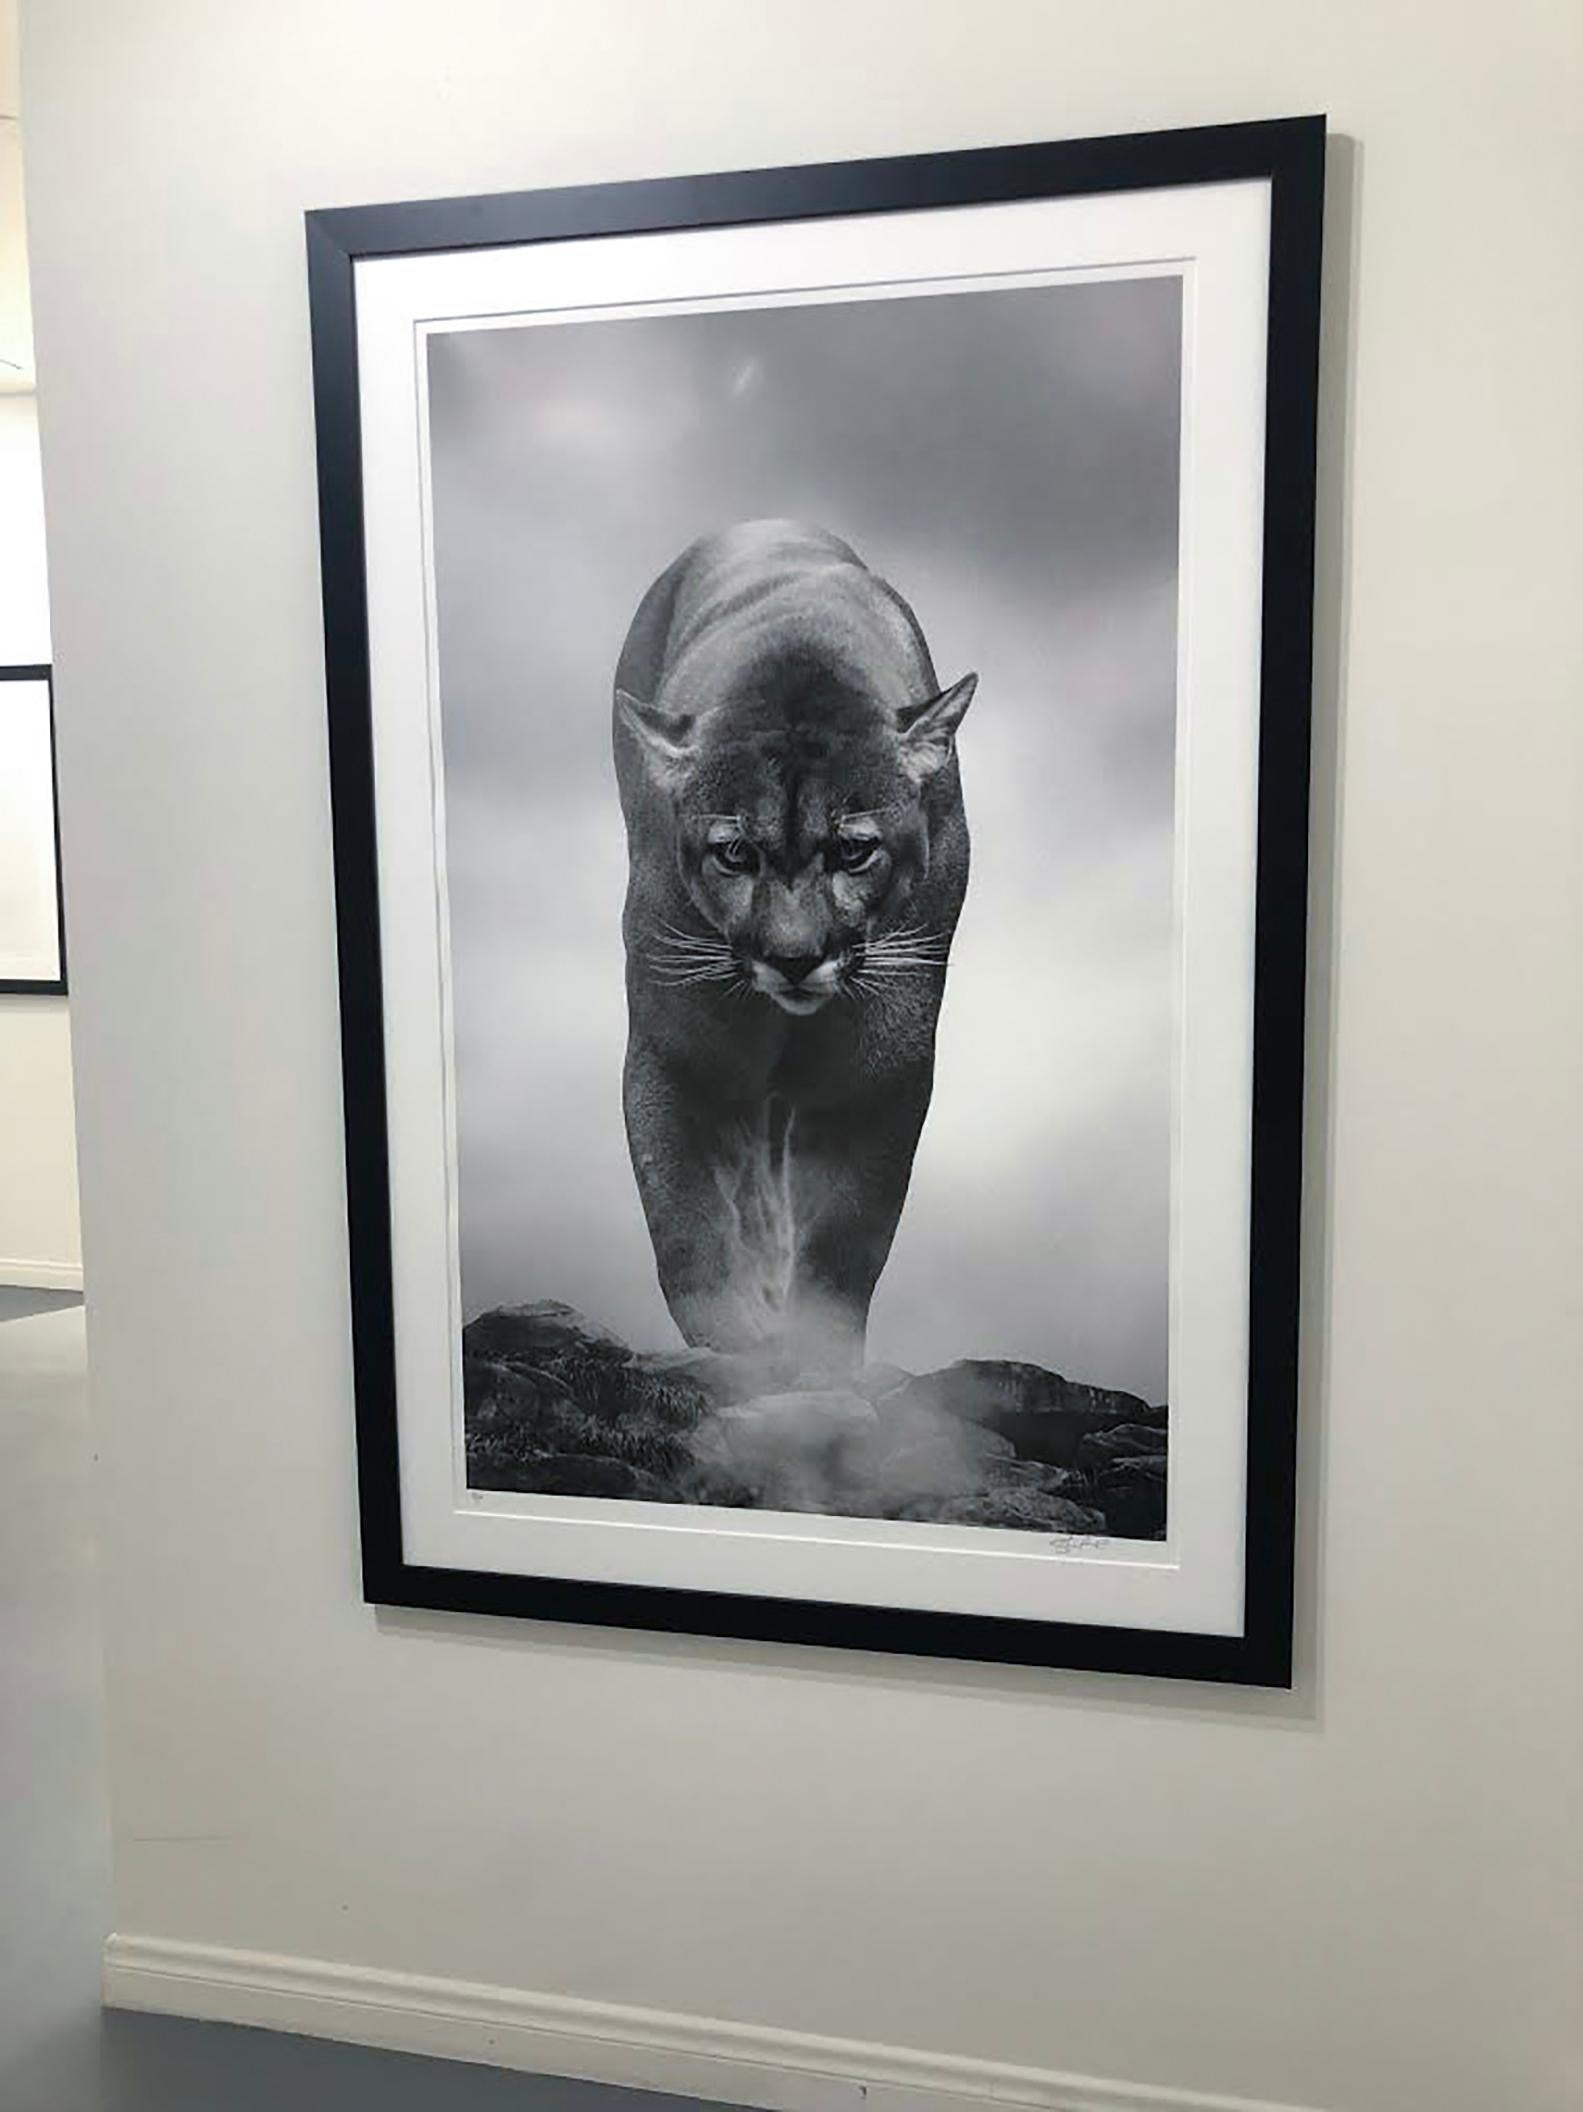  36x48 Unsigned Test Print  Photography, Cougar, Mountain Lion - Gray Landscape Photograph by Shane Russeck